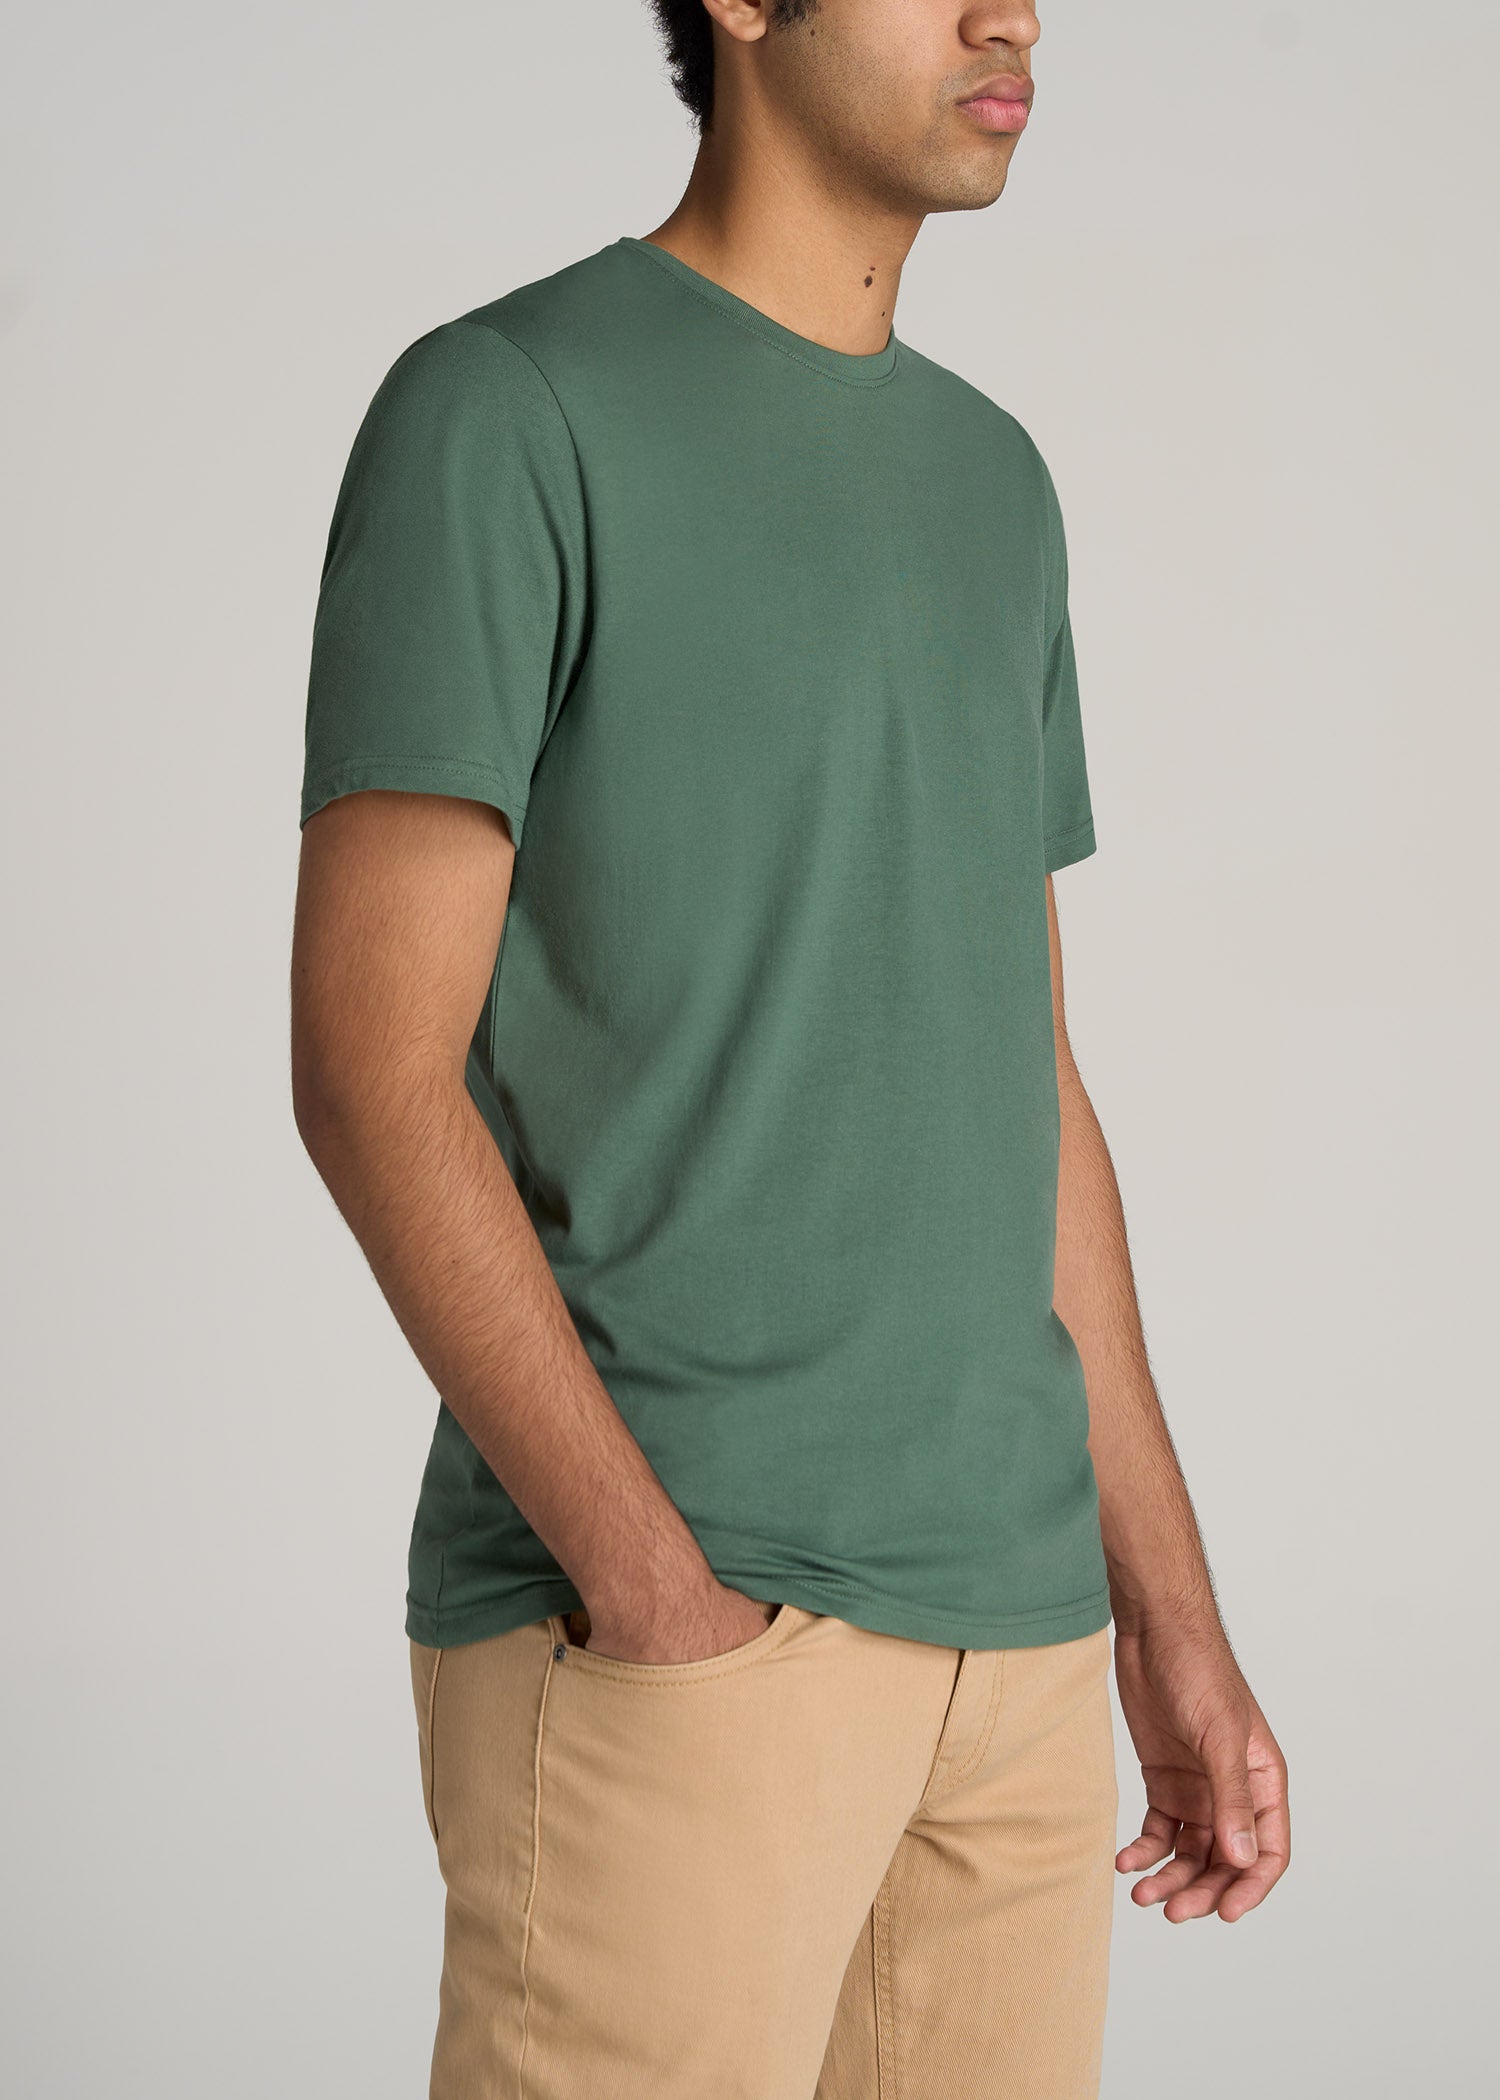 American-Tall-Men-Everyday-REGULAR-FIT-Crew-Neck-T-Shirt-Forest-Green-side